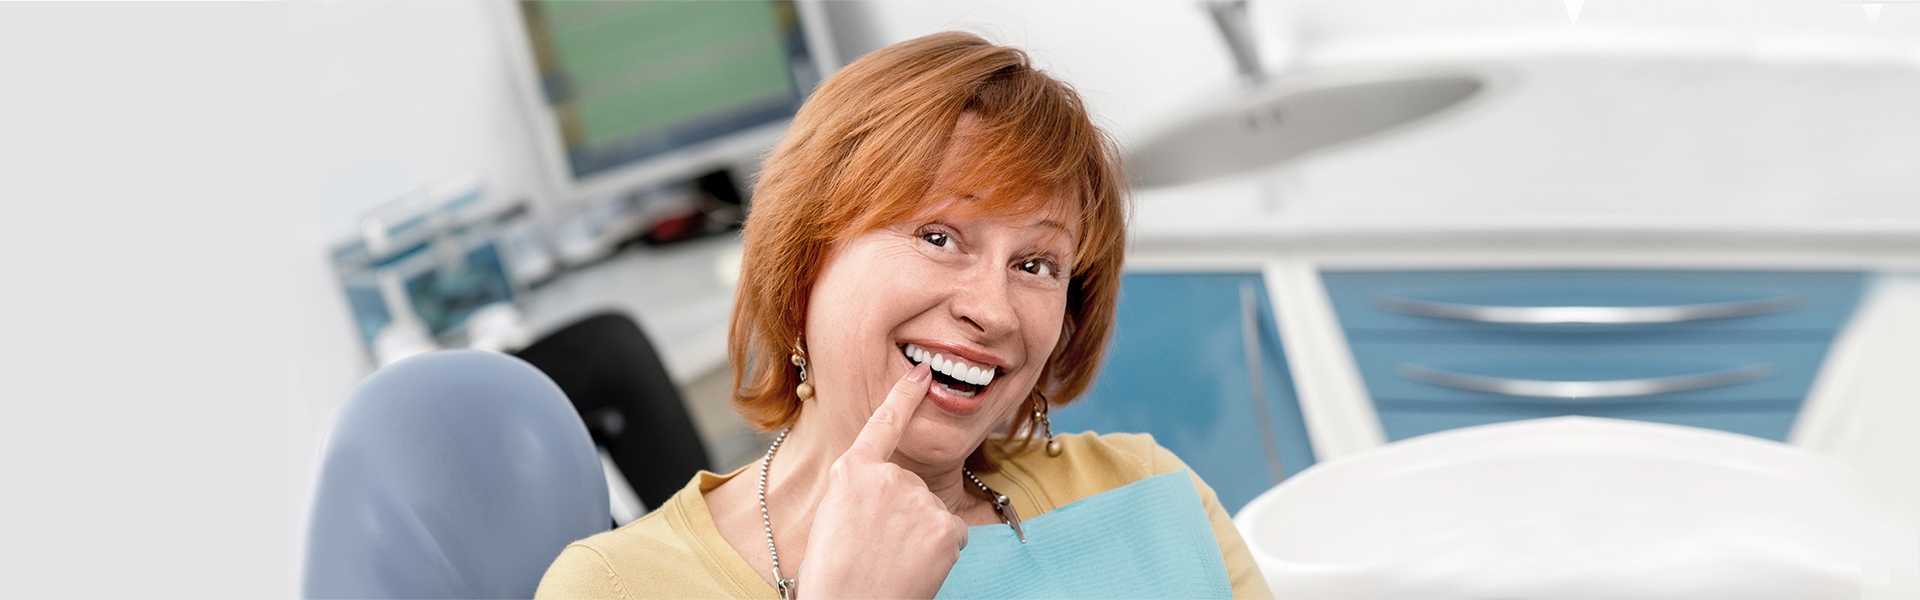 Root Canal Therapy in Petaluma, CA